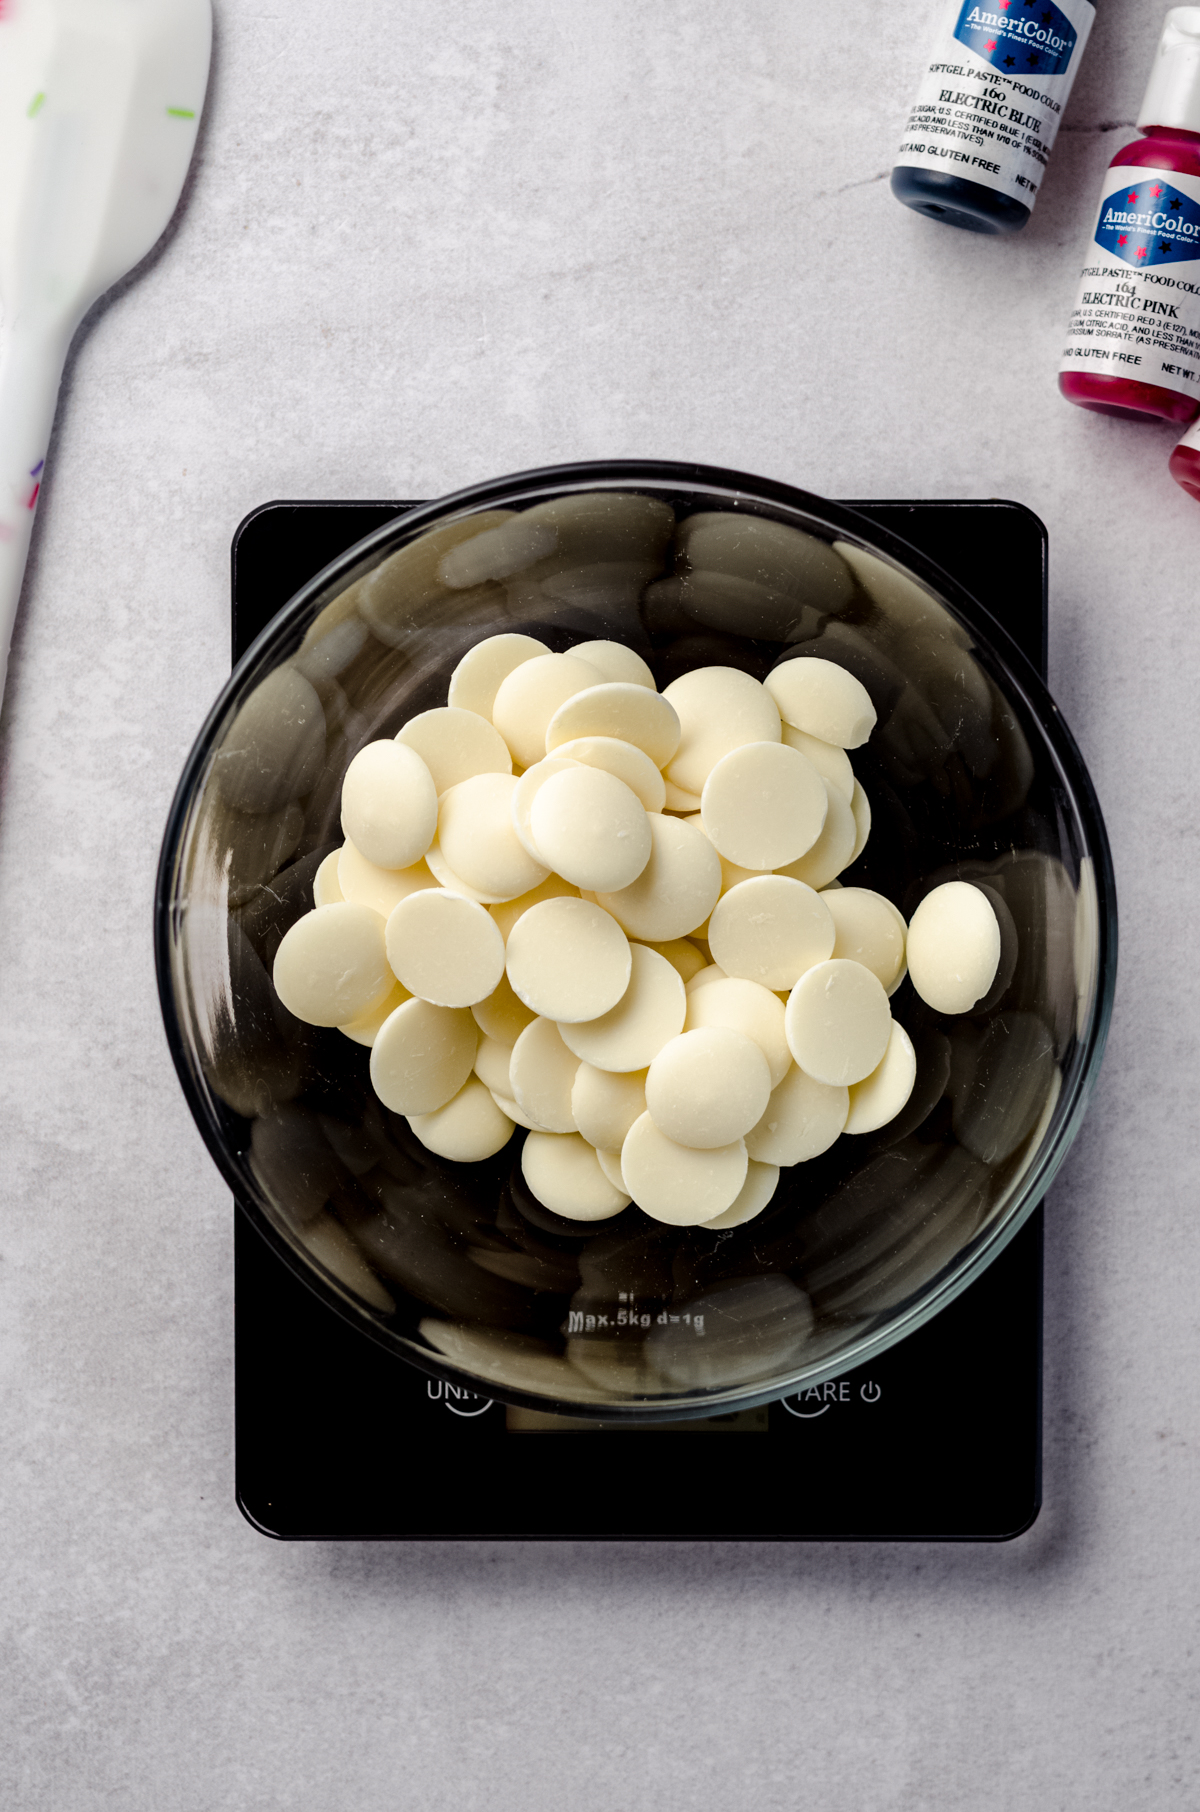 Aerial photo of a bowl of white chocolate melting wafers.